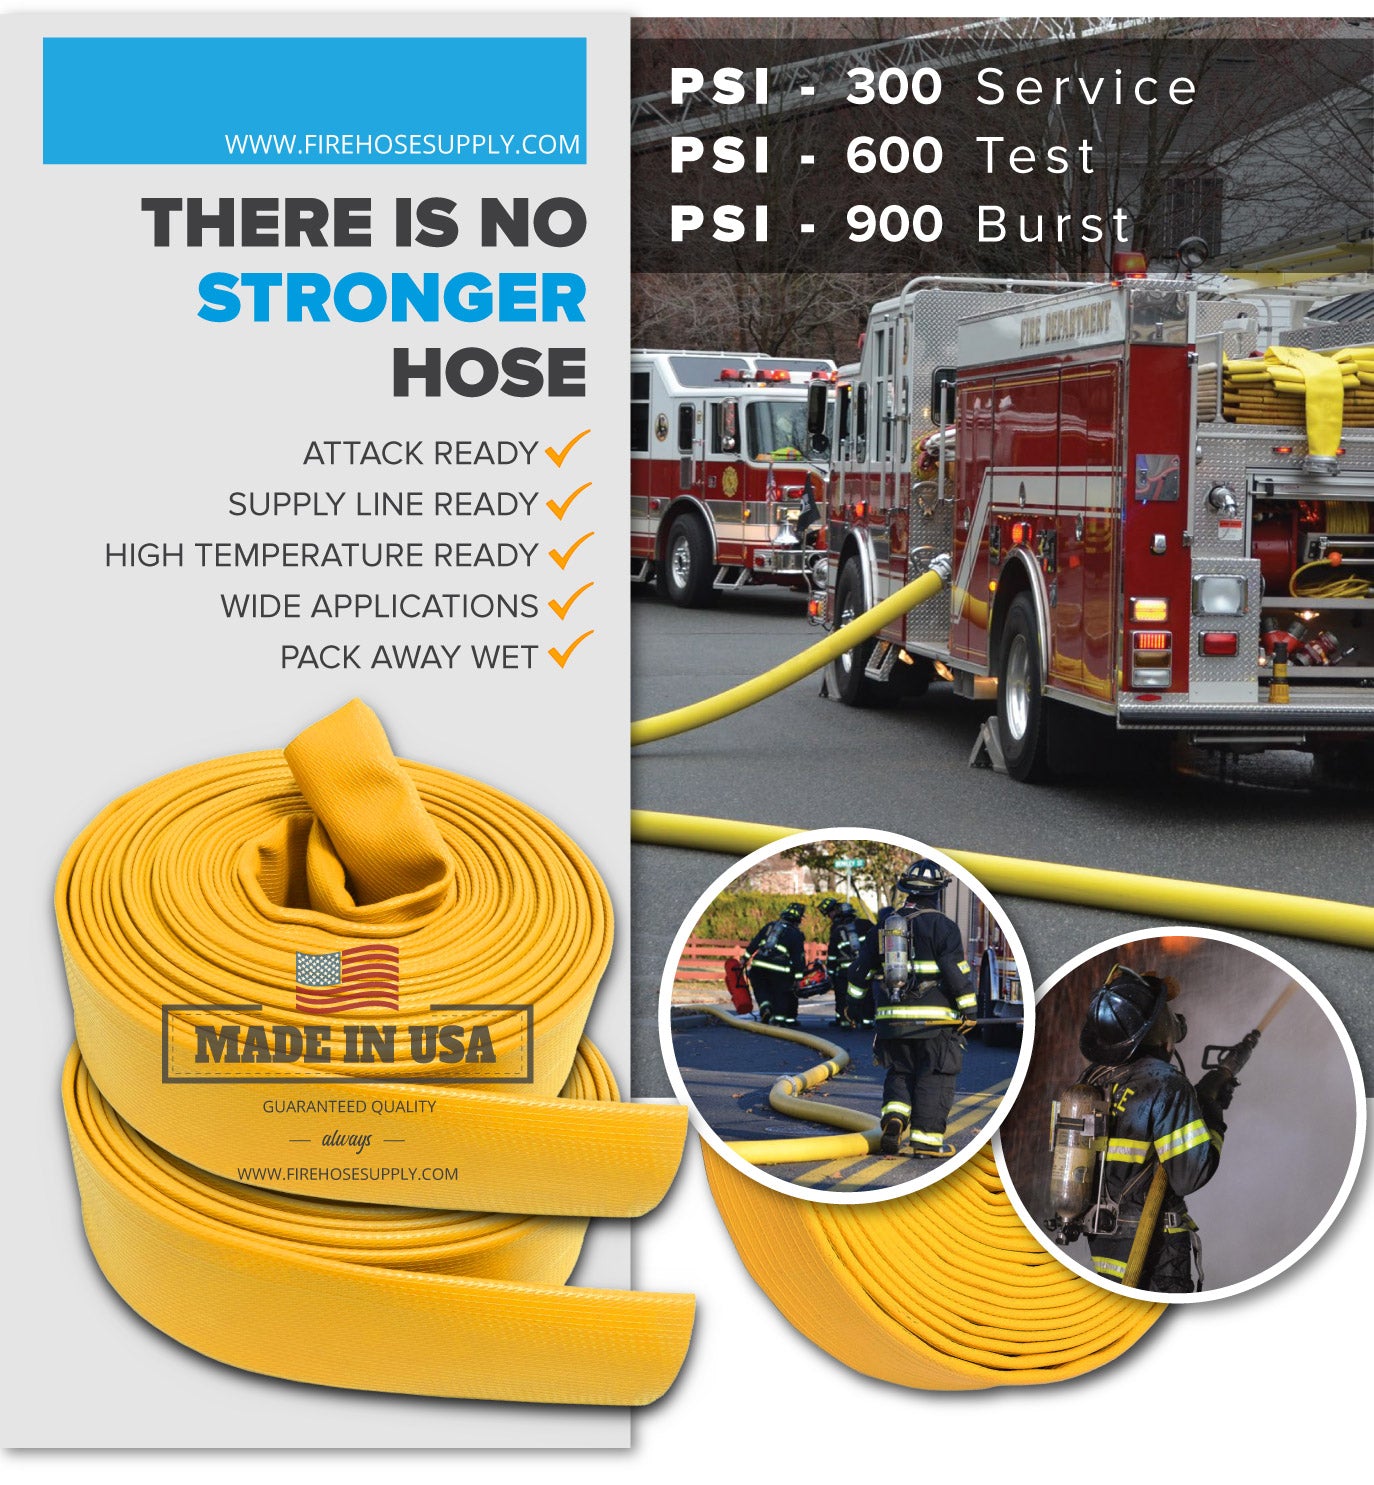 1 Inch Rubber Fire Hose Material Only Supply And Attack Ready Firefighter Yellow 600 PSI Test